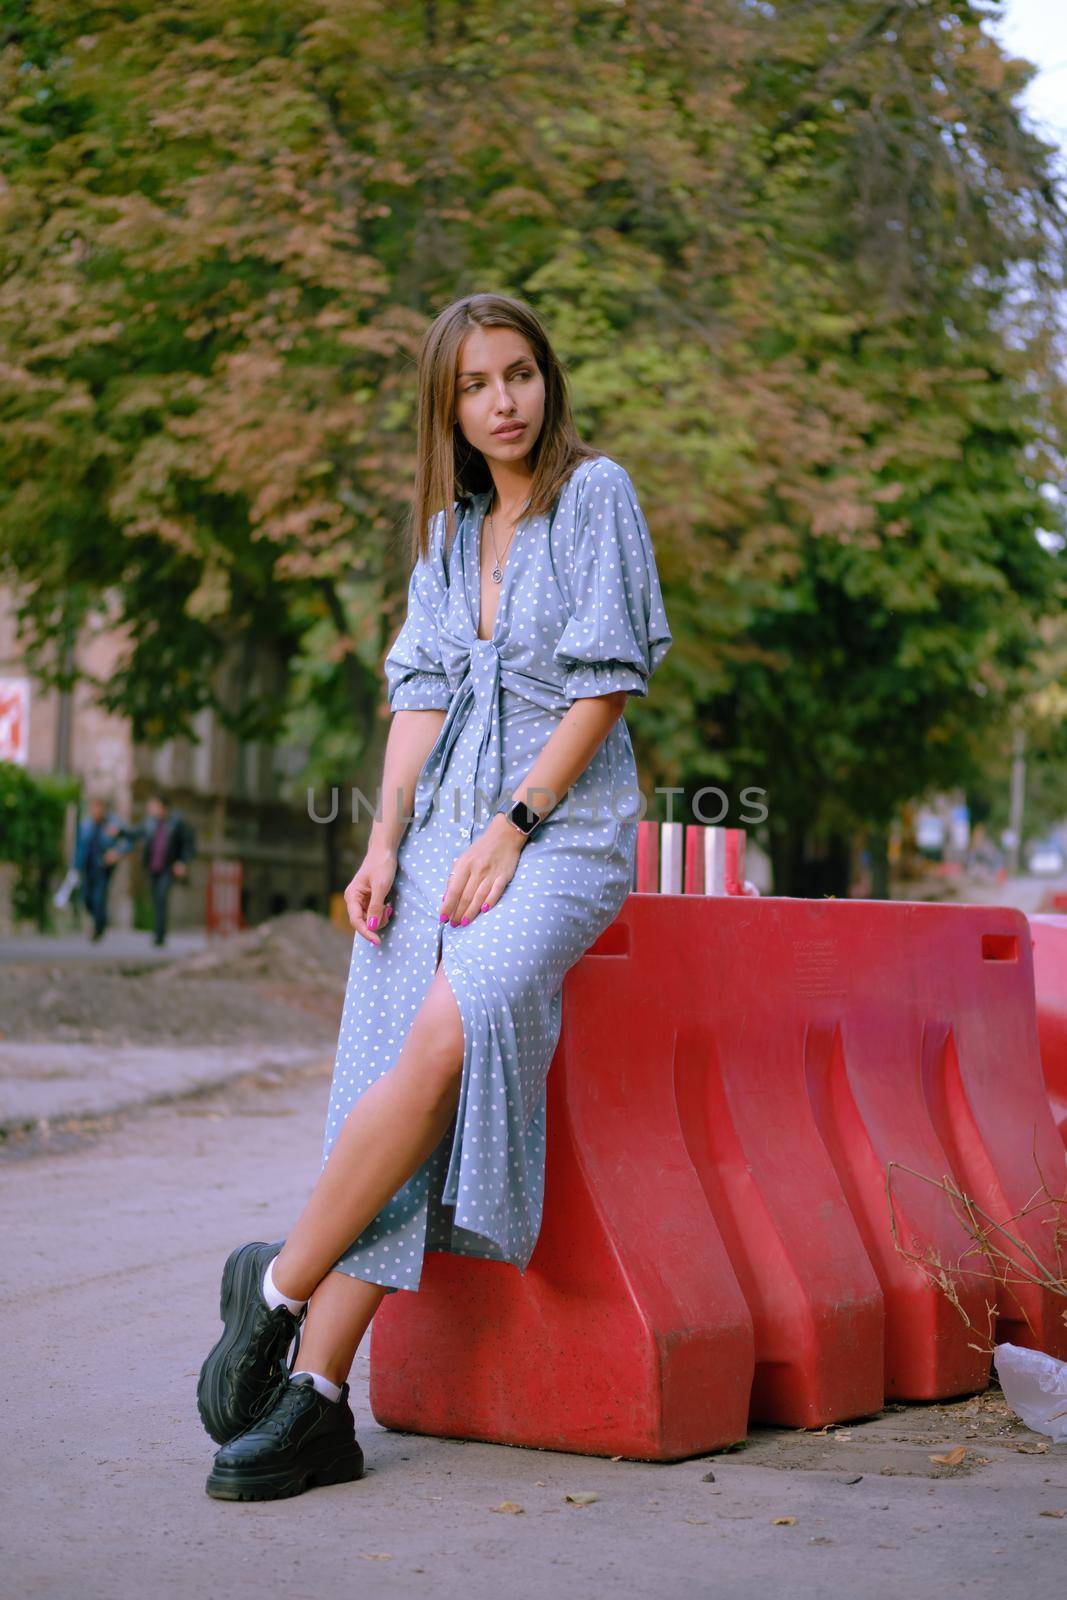 Blonde girl in long blue dress and a small black handbag on her shoulder is posing near a red guardrail, walking alone in the city. Full length shot. by nazarovsergey